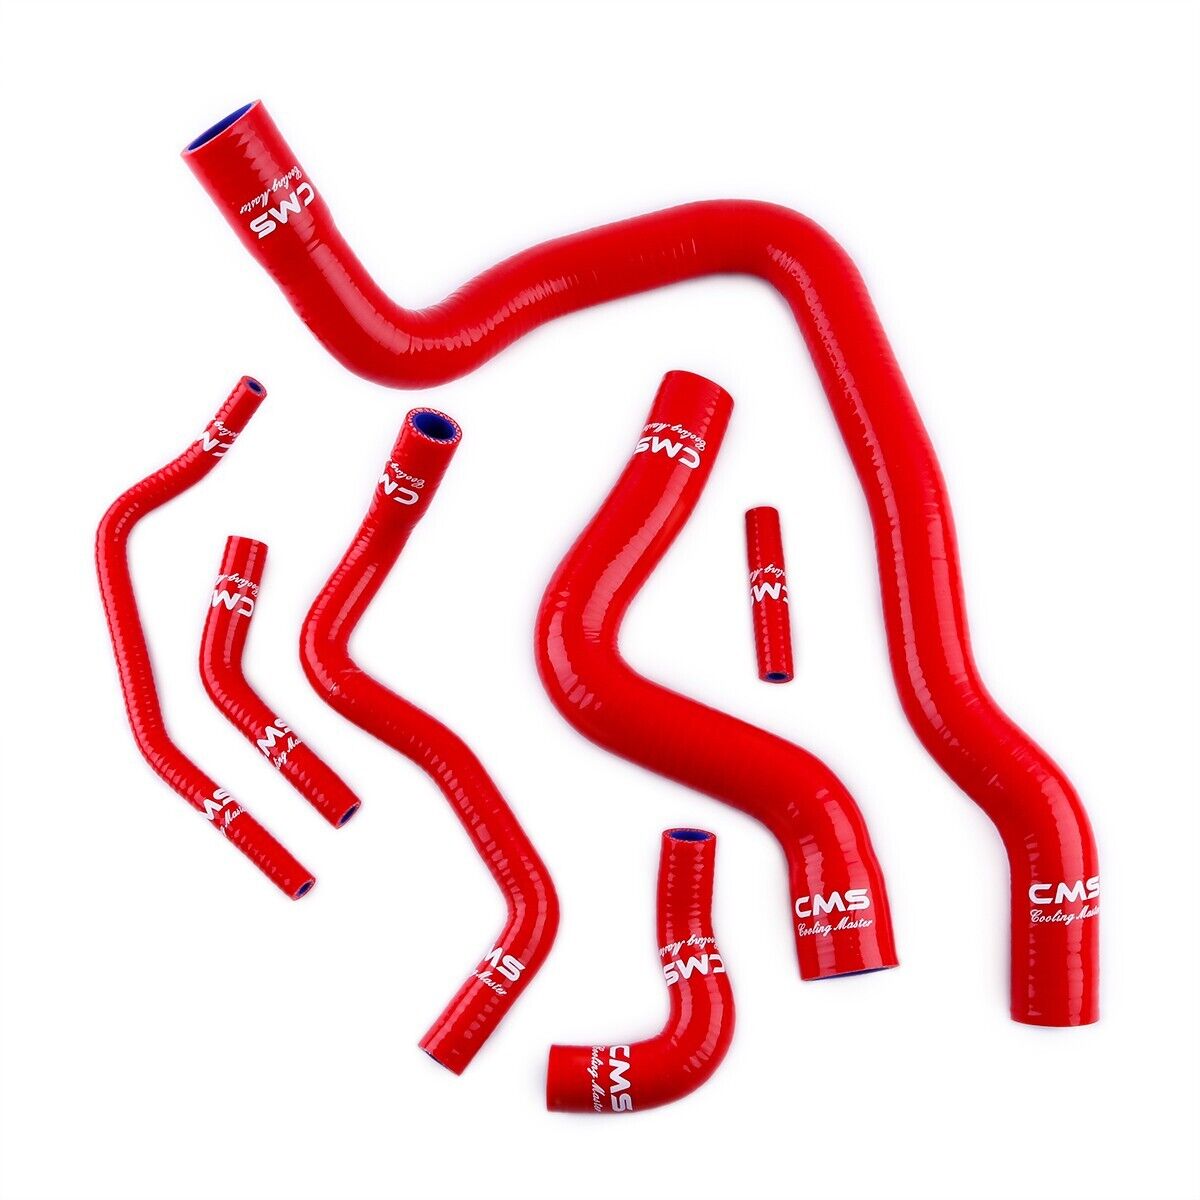 Silicone Radiator Hose Red Kit for 1996-2004 Volvo S70 V70 850 T5 T-5/ T-5R 2.3T